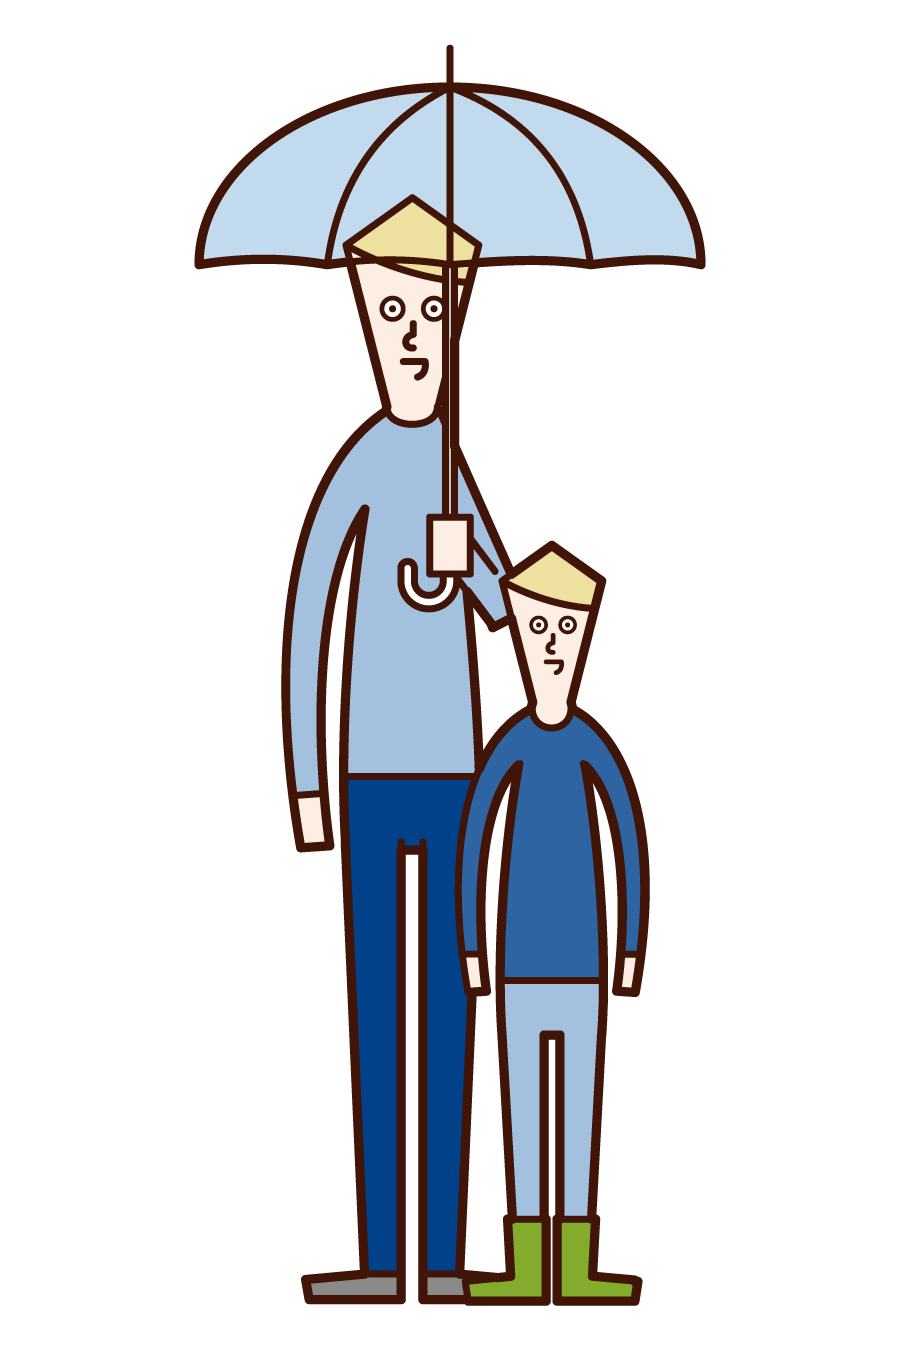 Illustration of a parent and child (man) holding an umbrella